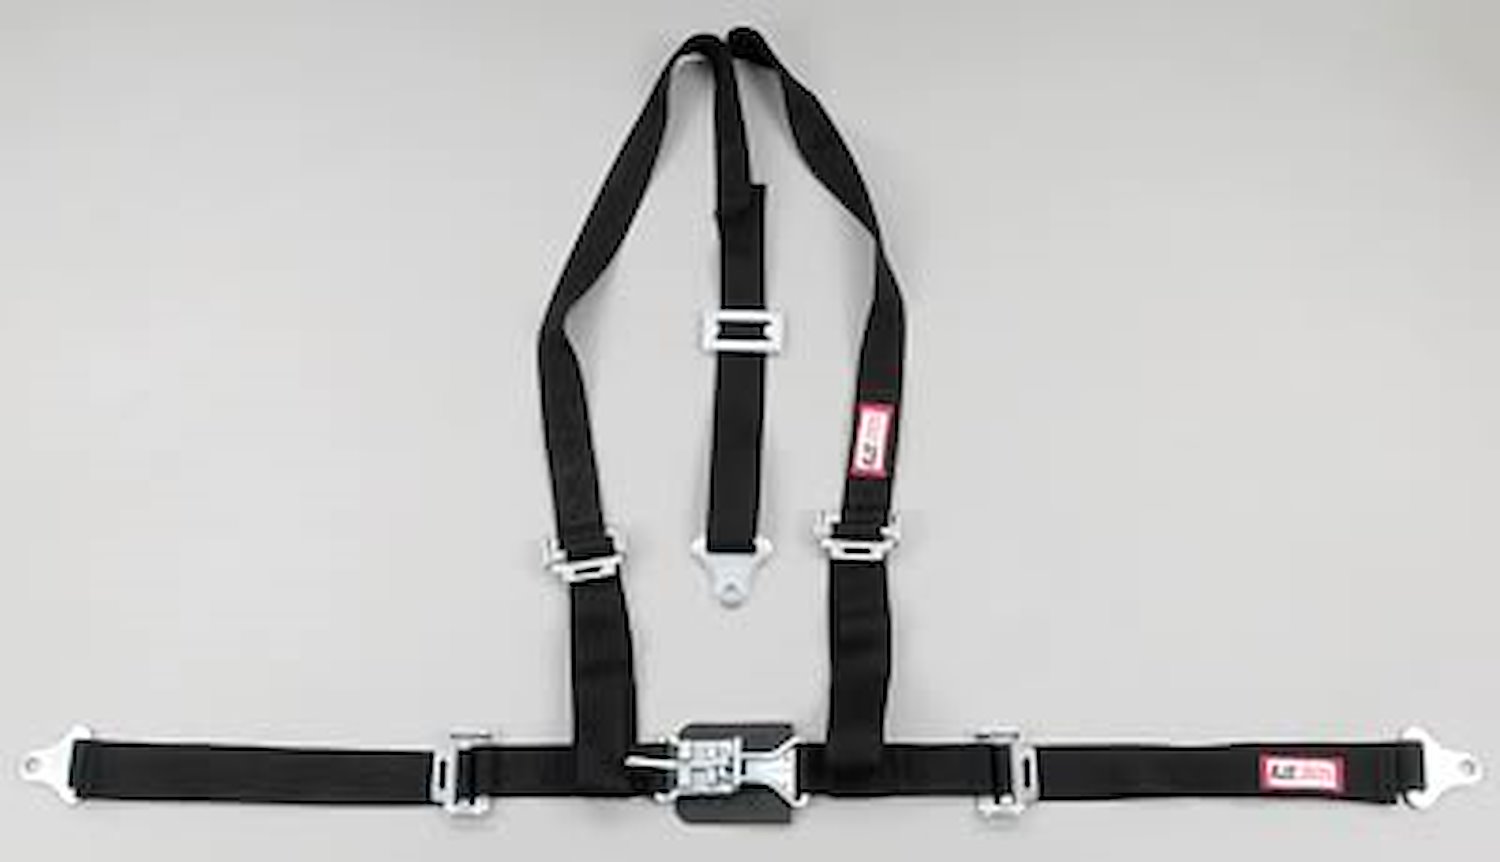 NON-SFI L&L HARNESS 2 PULL UP Lap Belt BOLT SEWN IN 2 S.H. Y FLOOR Mount WRAP/BOLT RED